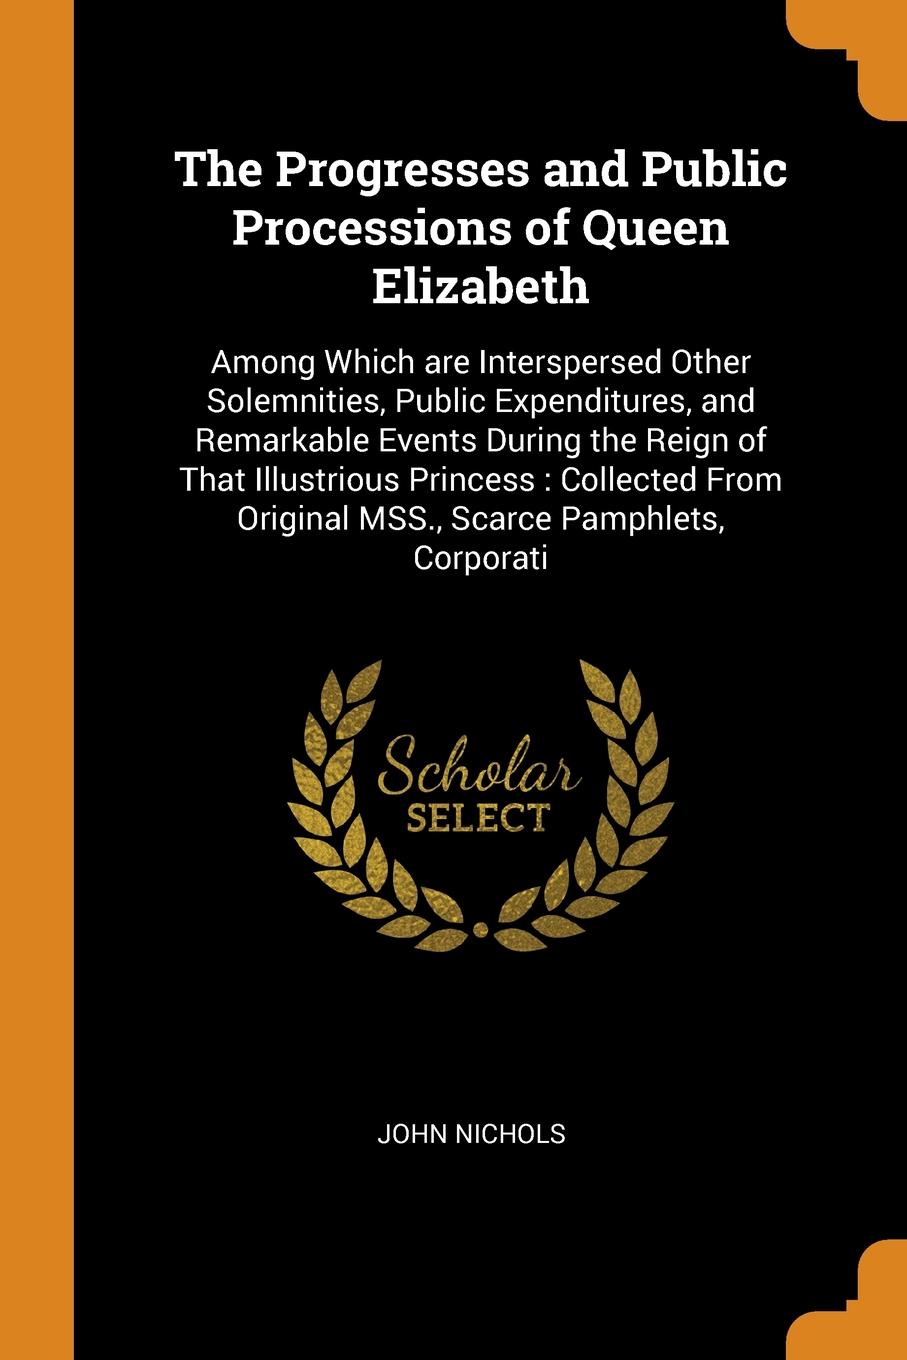 The Progresses and Public Processions of Queen Elizabeth. Among Which are Interspersed Other Solemnities, Public Expenditures, and Remarkable Events During the Reign of That Illustrious Princess : Collected From Original MSS., Scarce Pamphlets, Co...